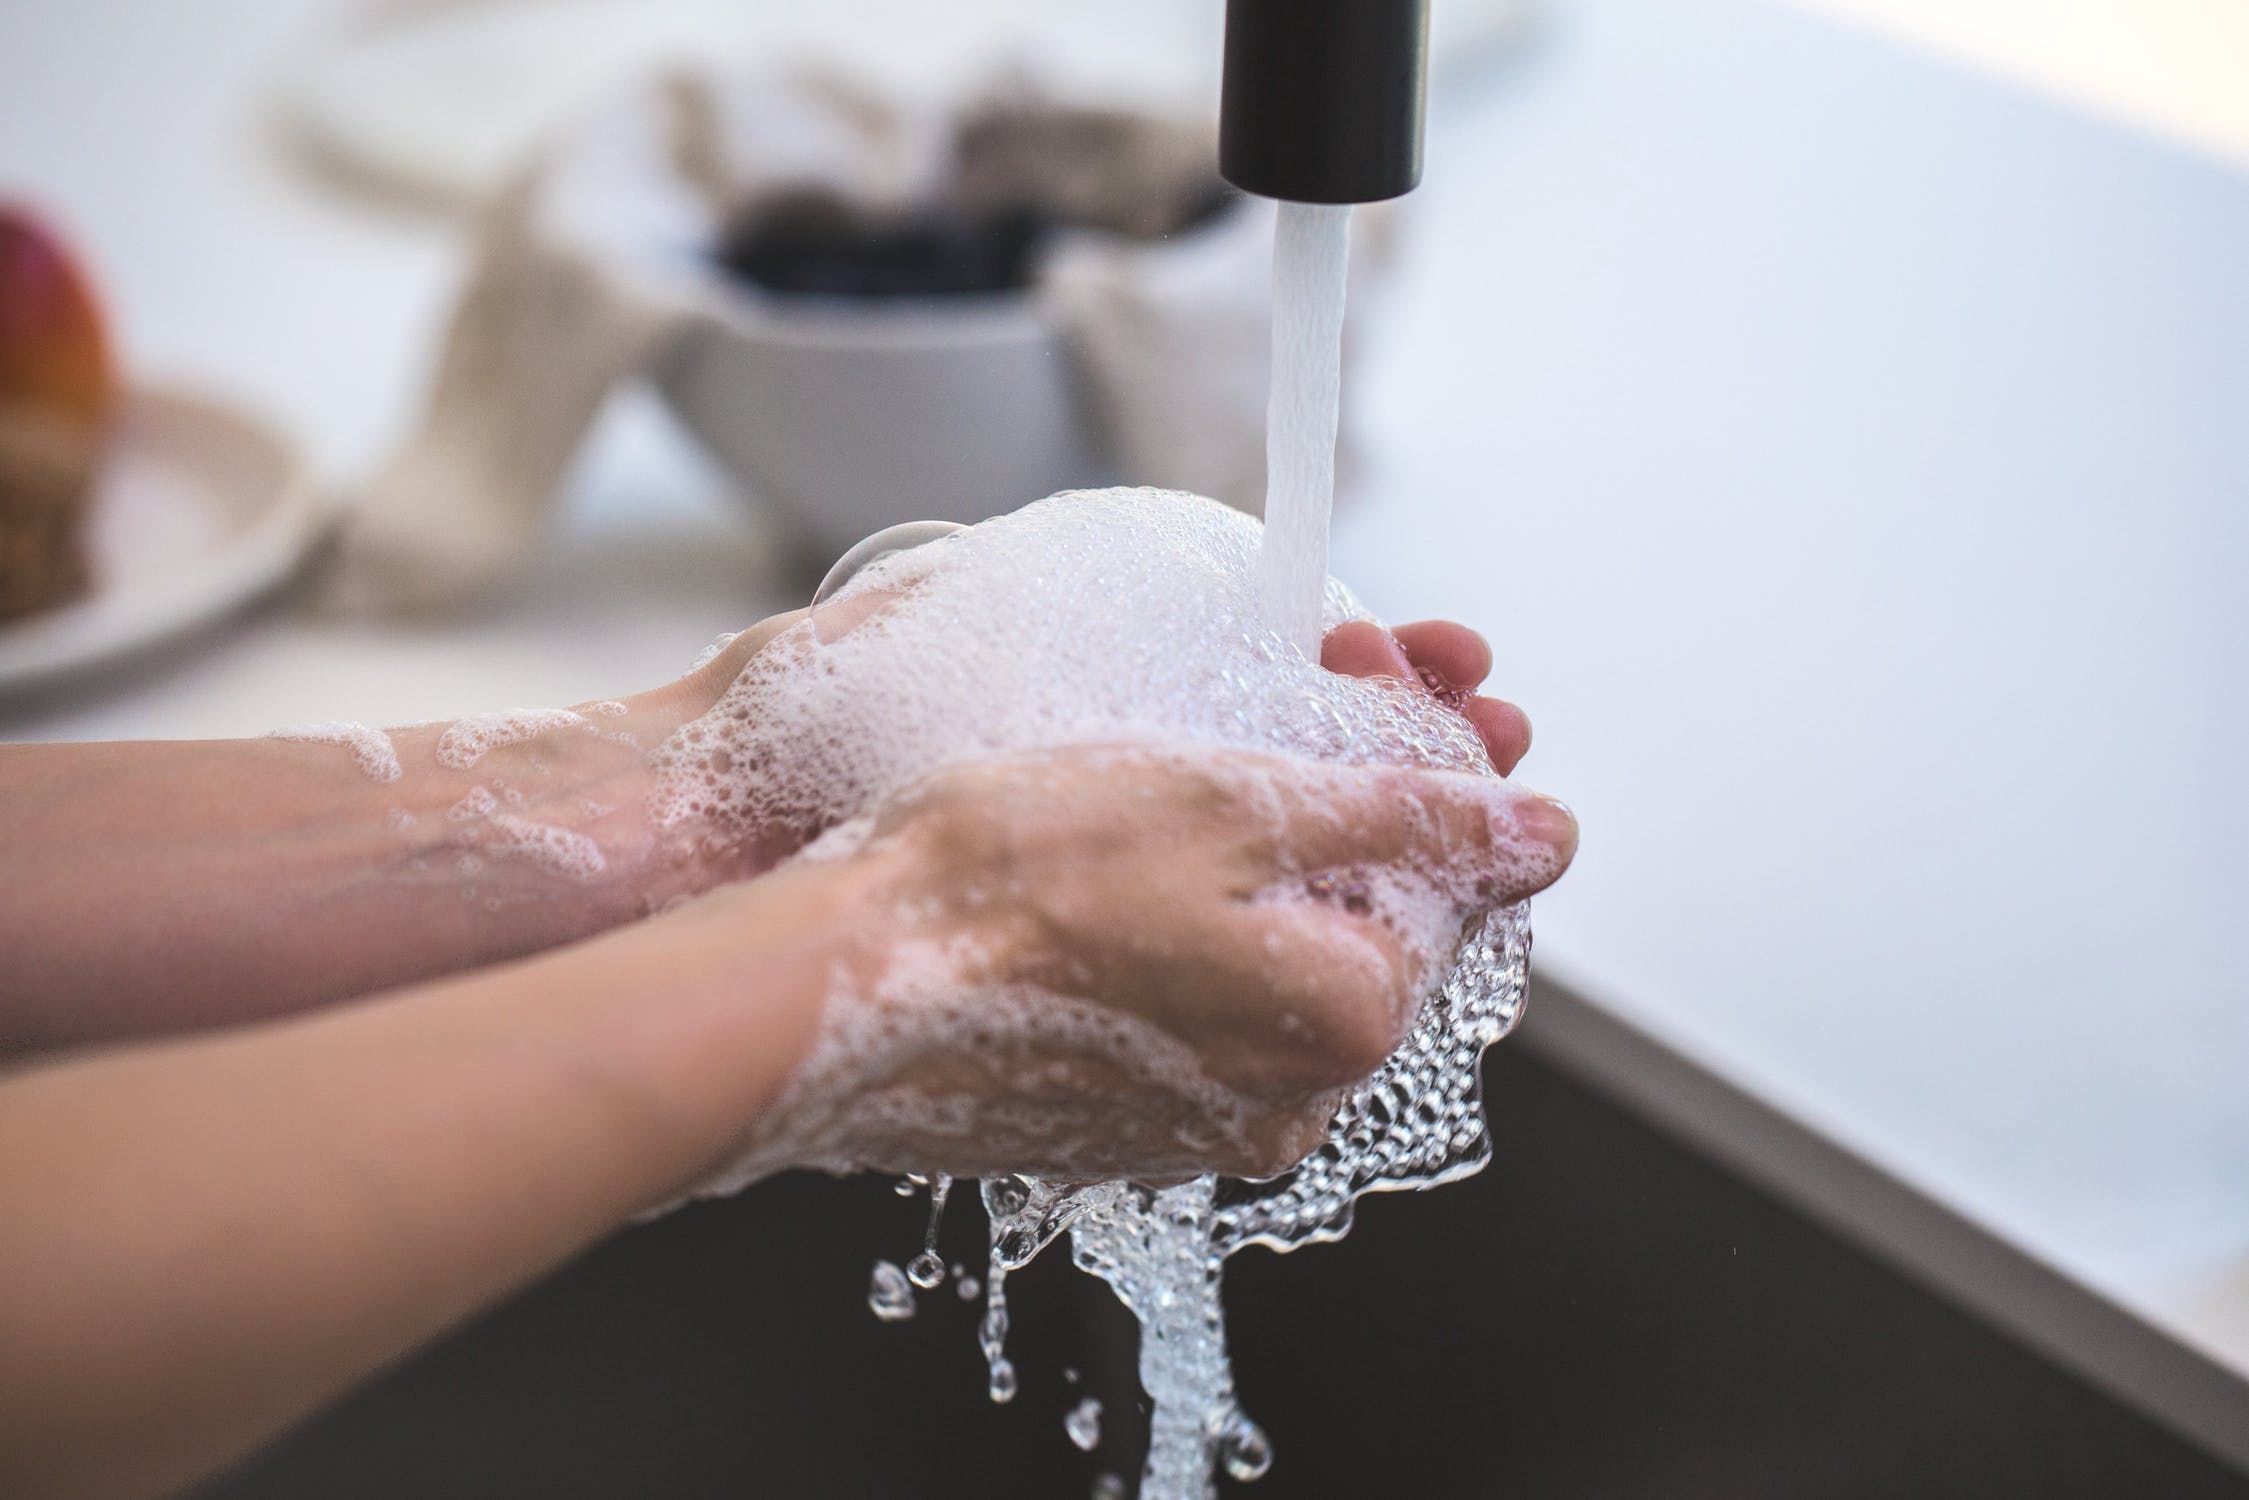 Hands being washed with soap suds.